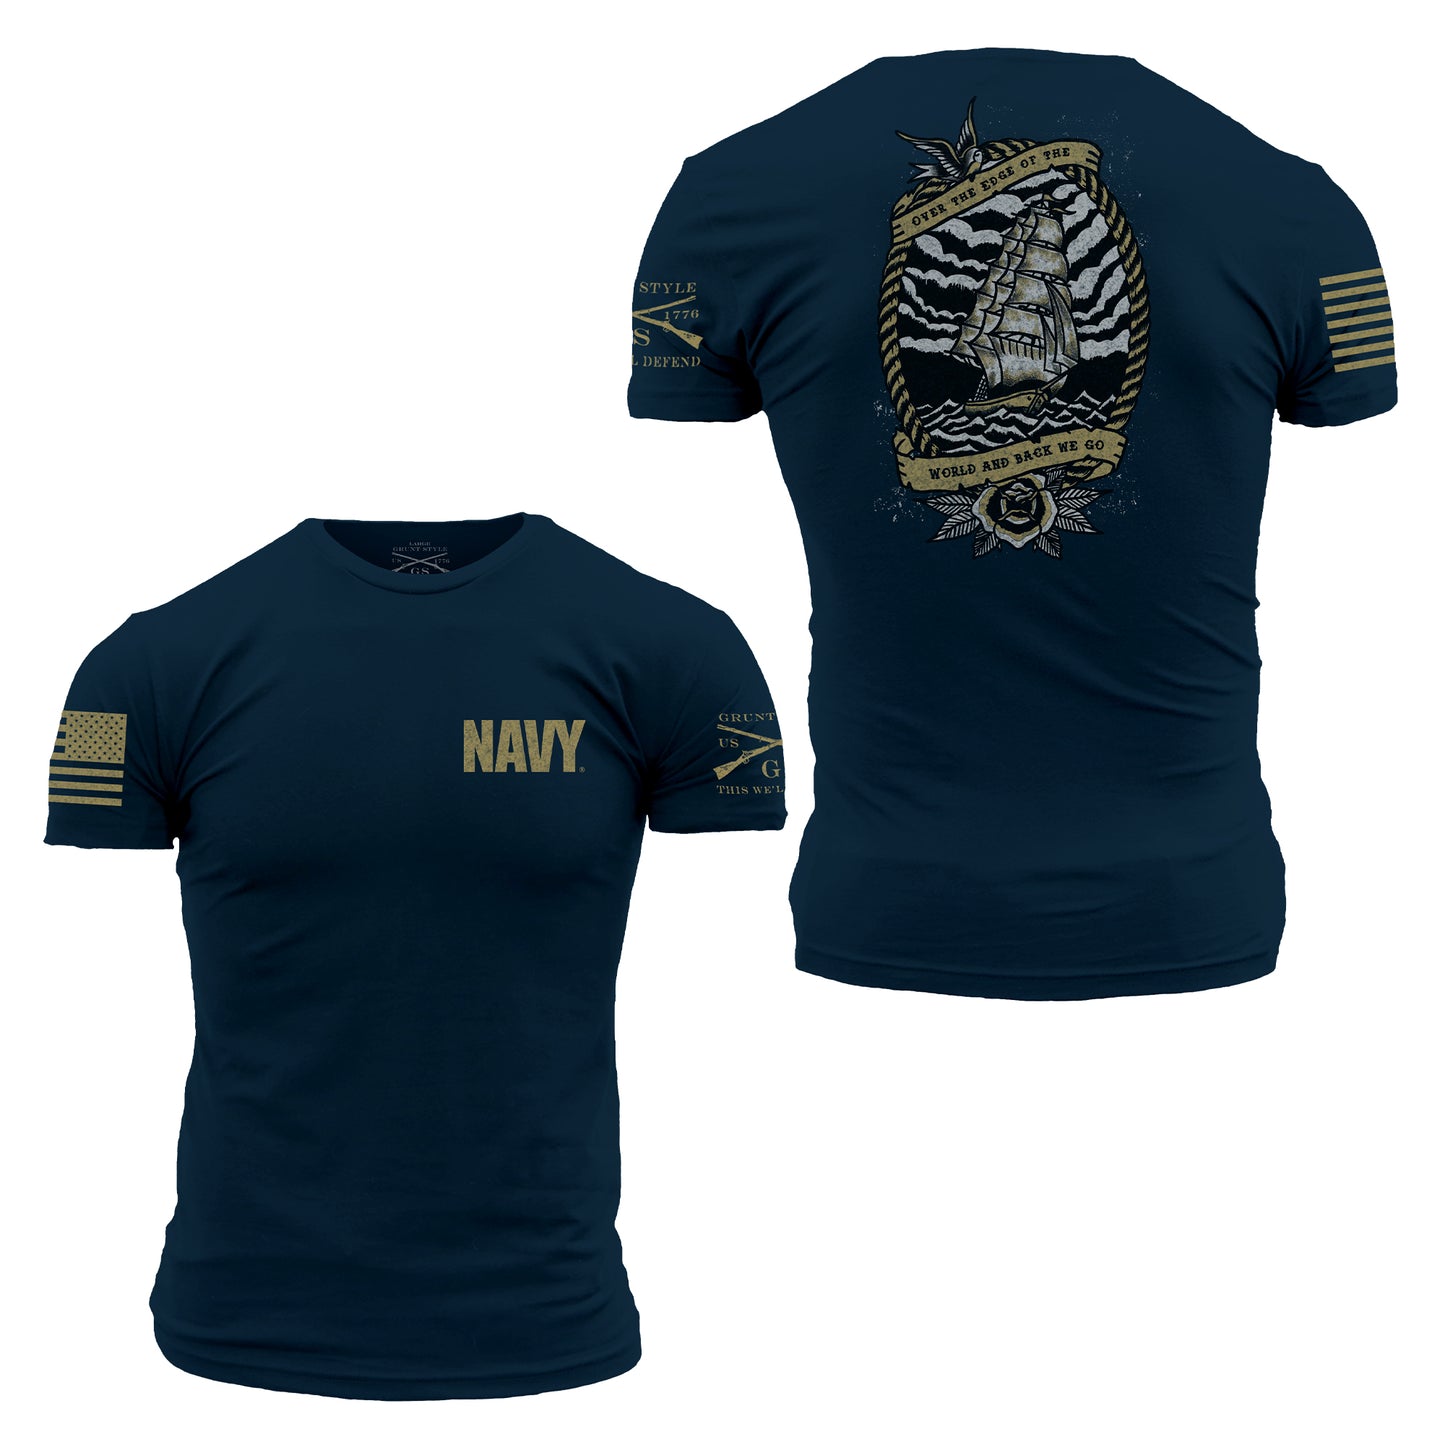 United States Navy Tee | Edge of the World 2.0 - Made in the USA